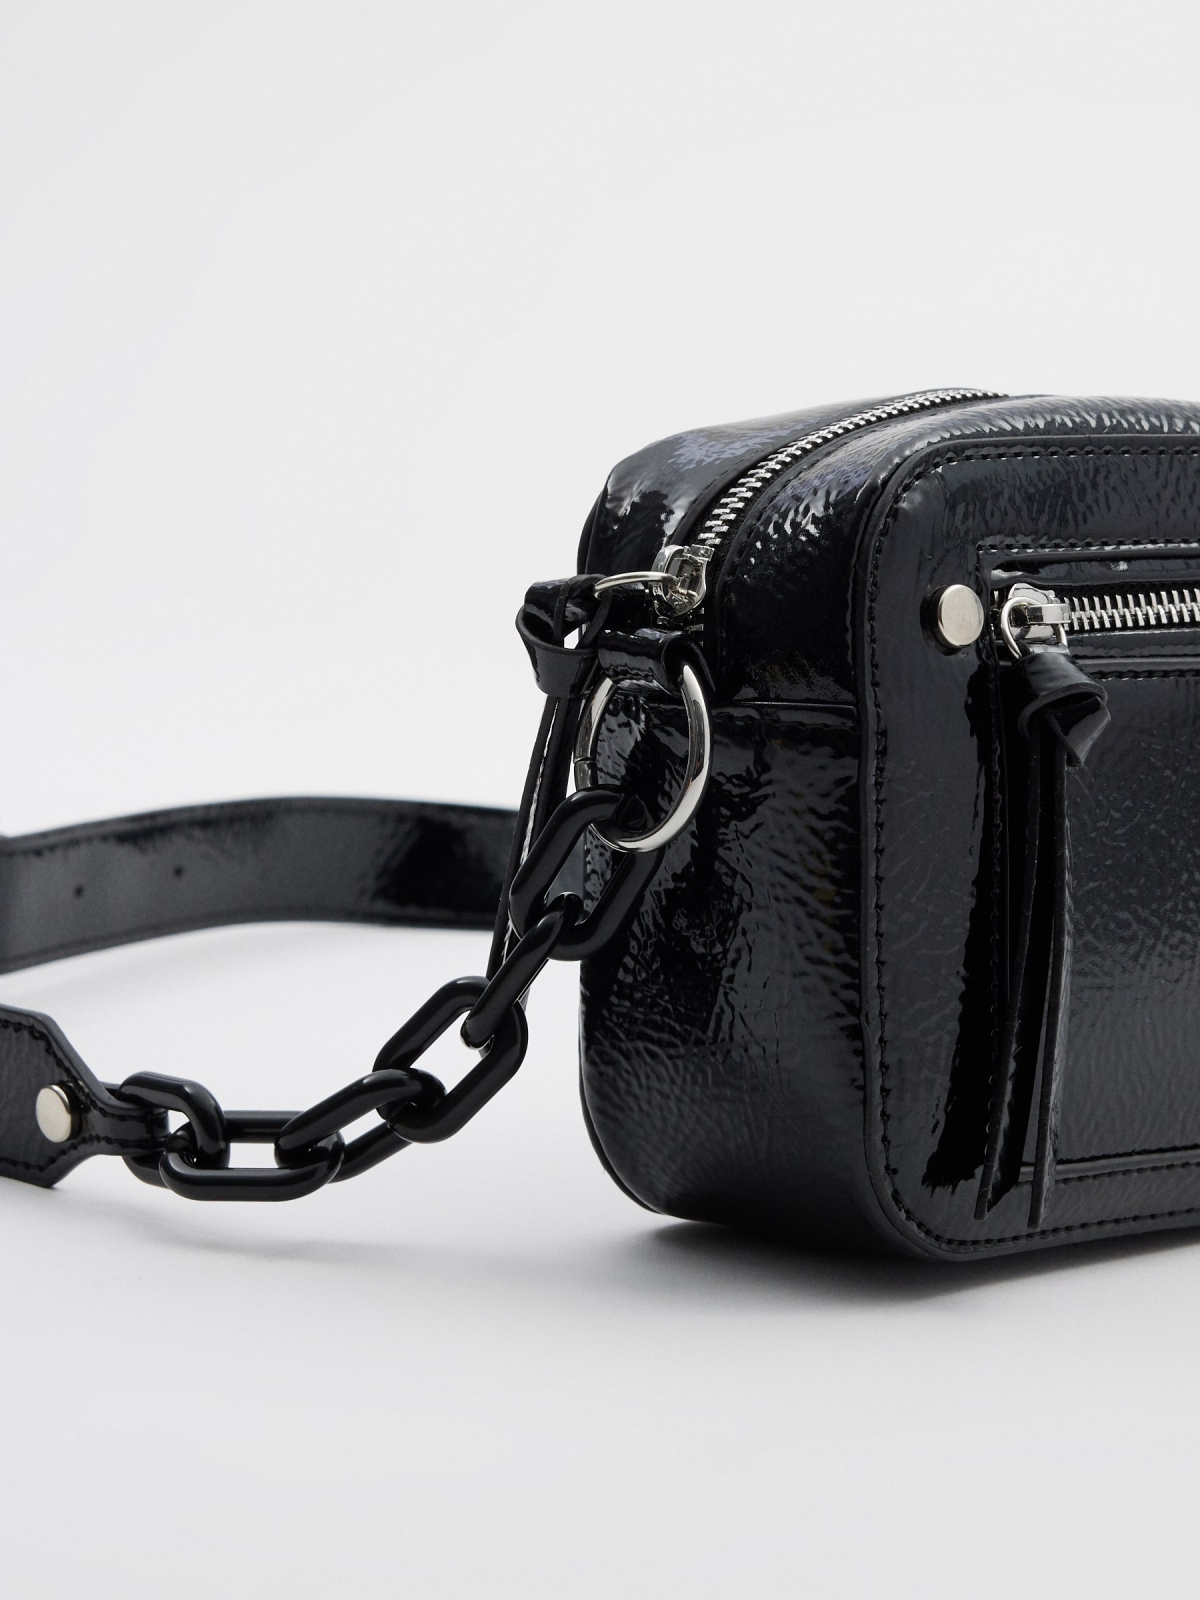 Patent leather effect crossbody bag black back view